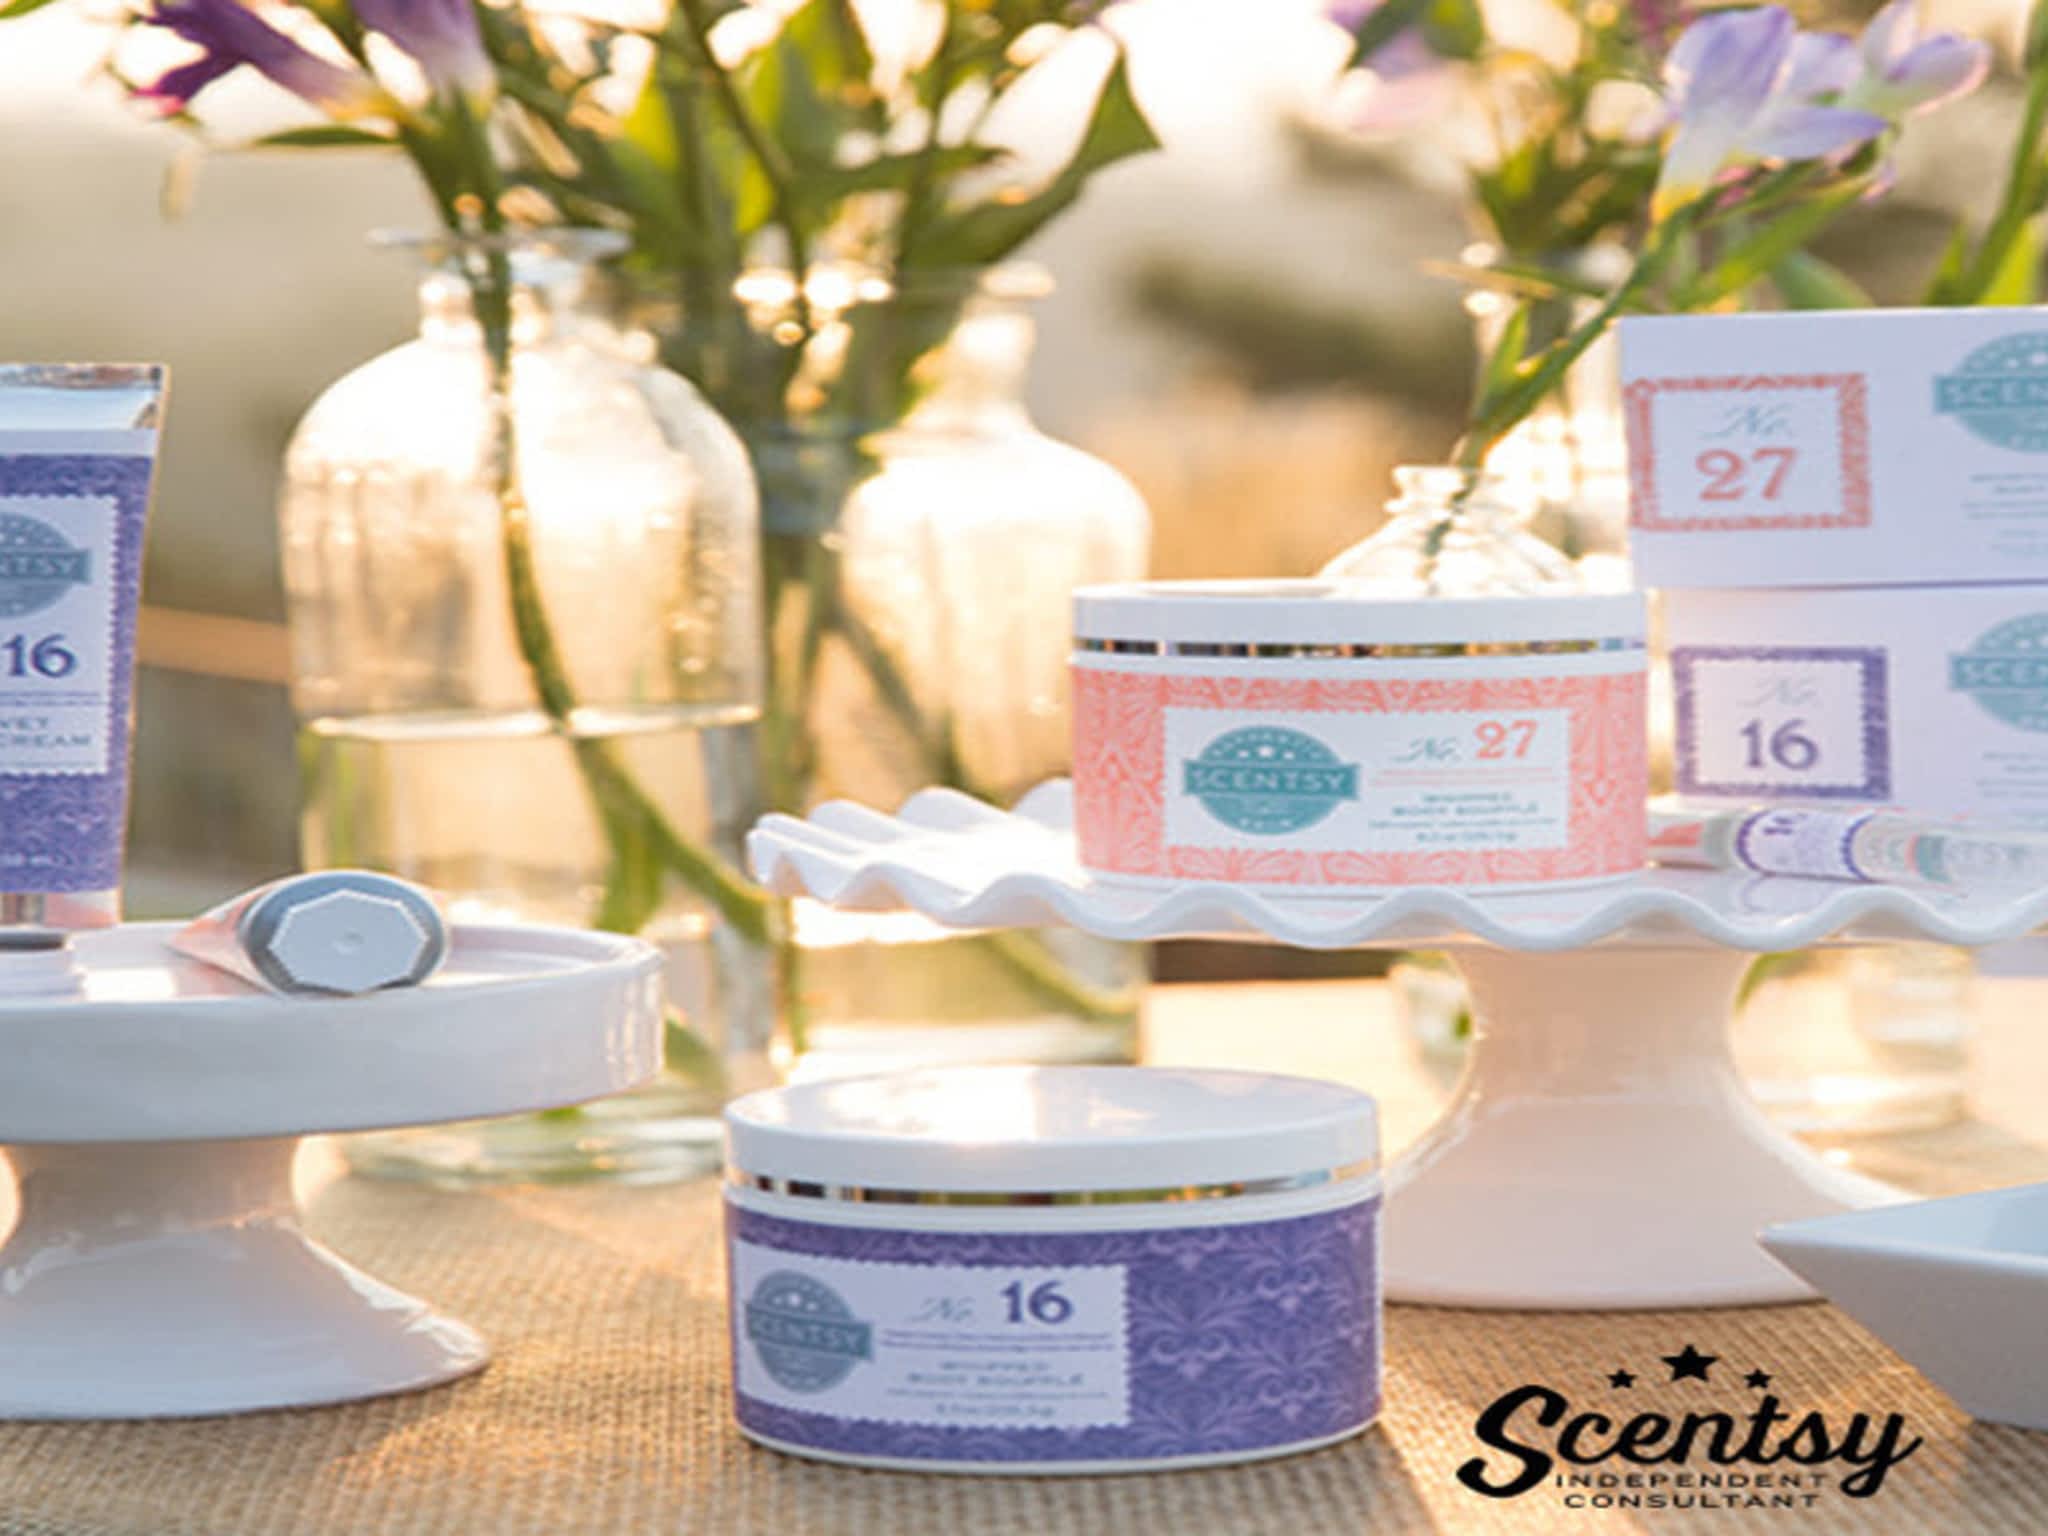 photo Michelle Wink - Independent Scentsy Consultant